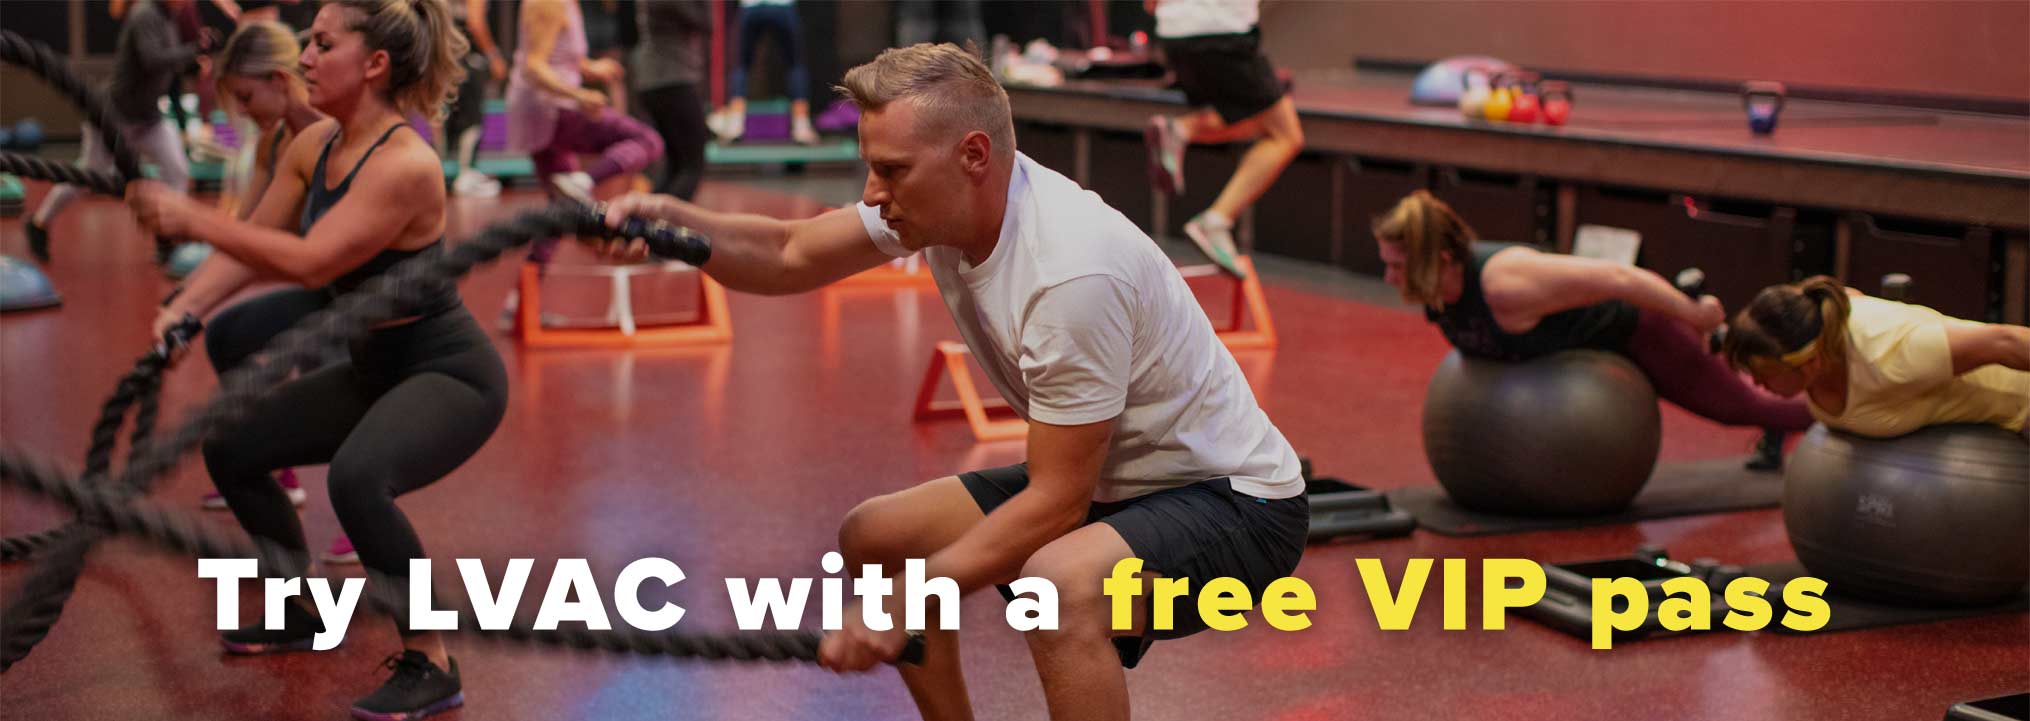 Try LVAC with a free VIP pass